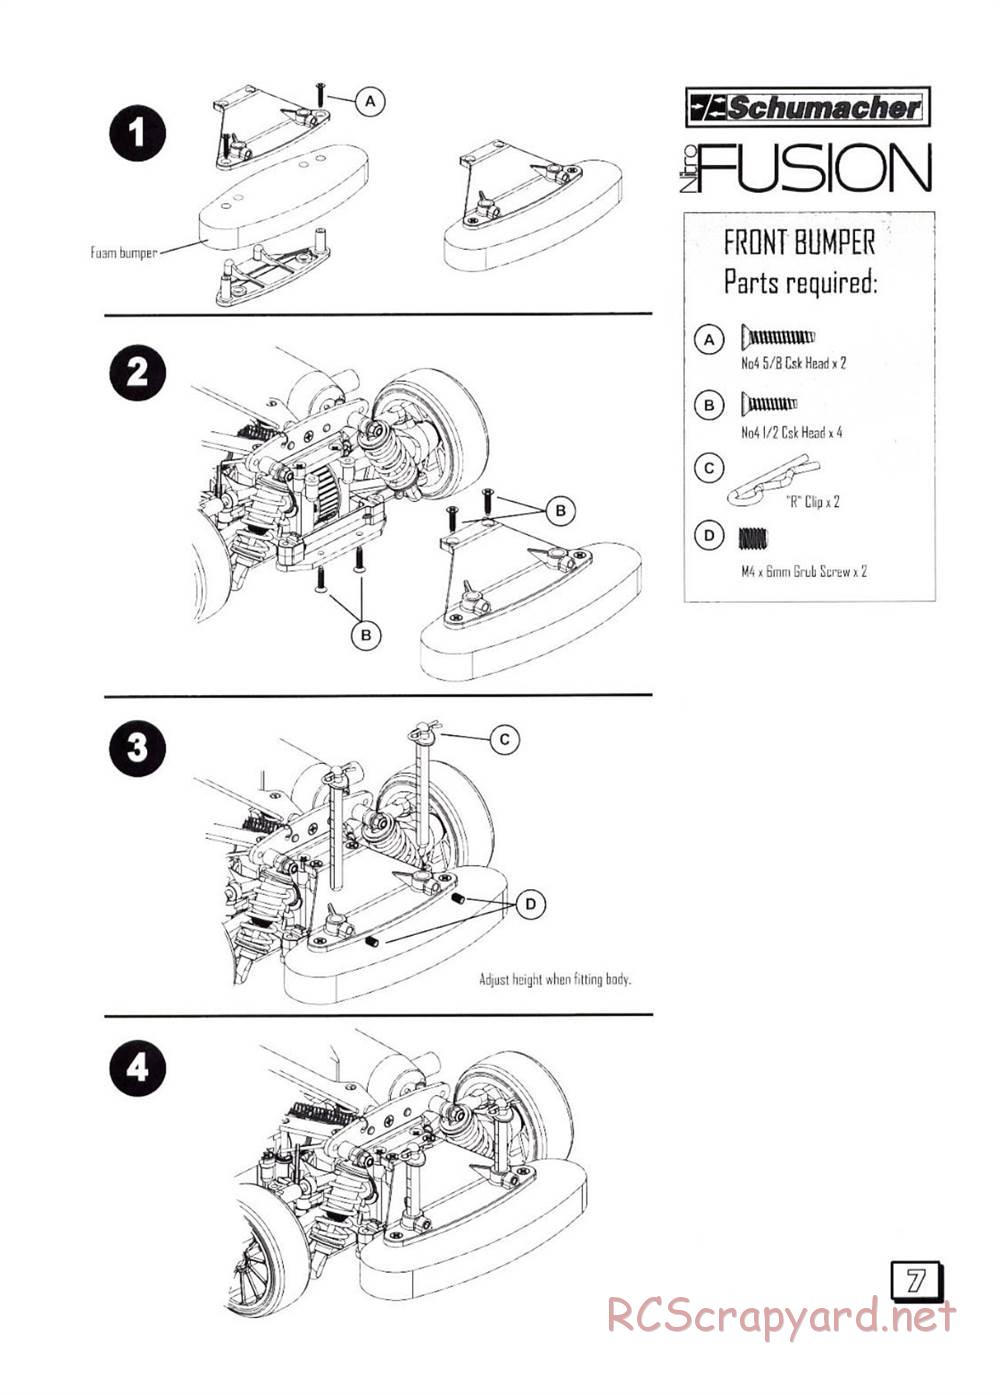 Schumacher - Fusion 21 - Manual - Page 23